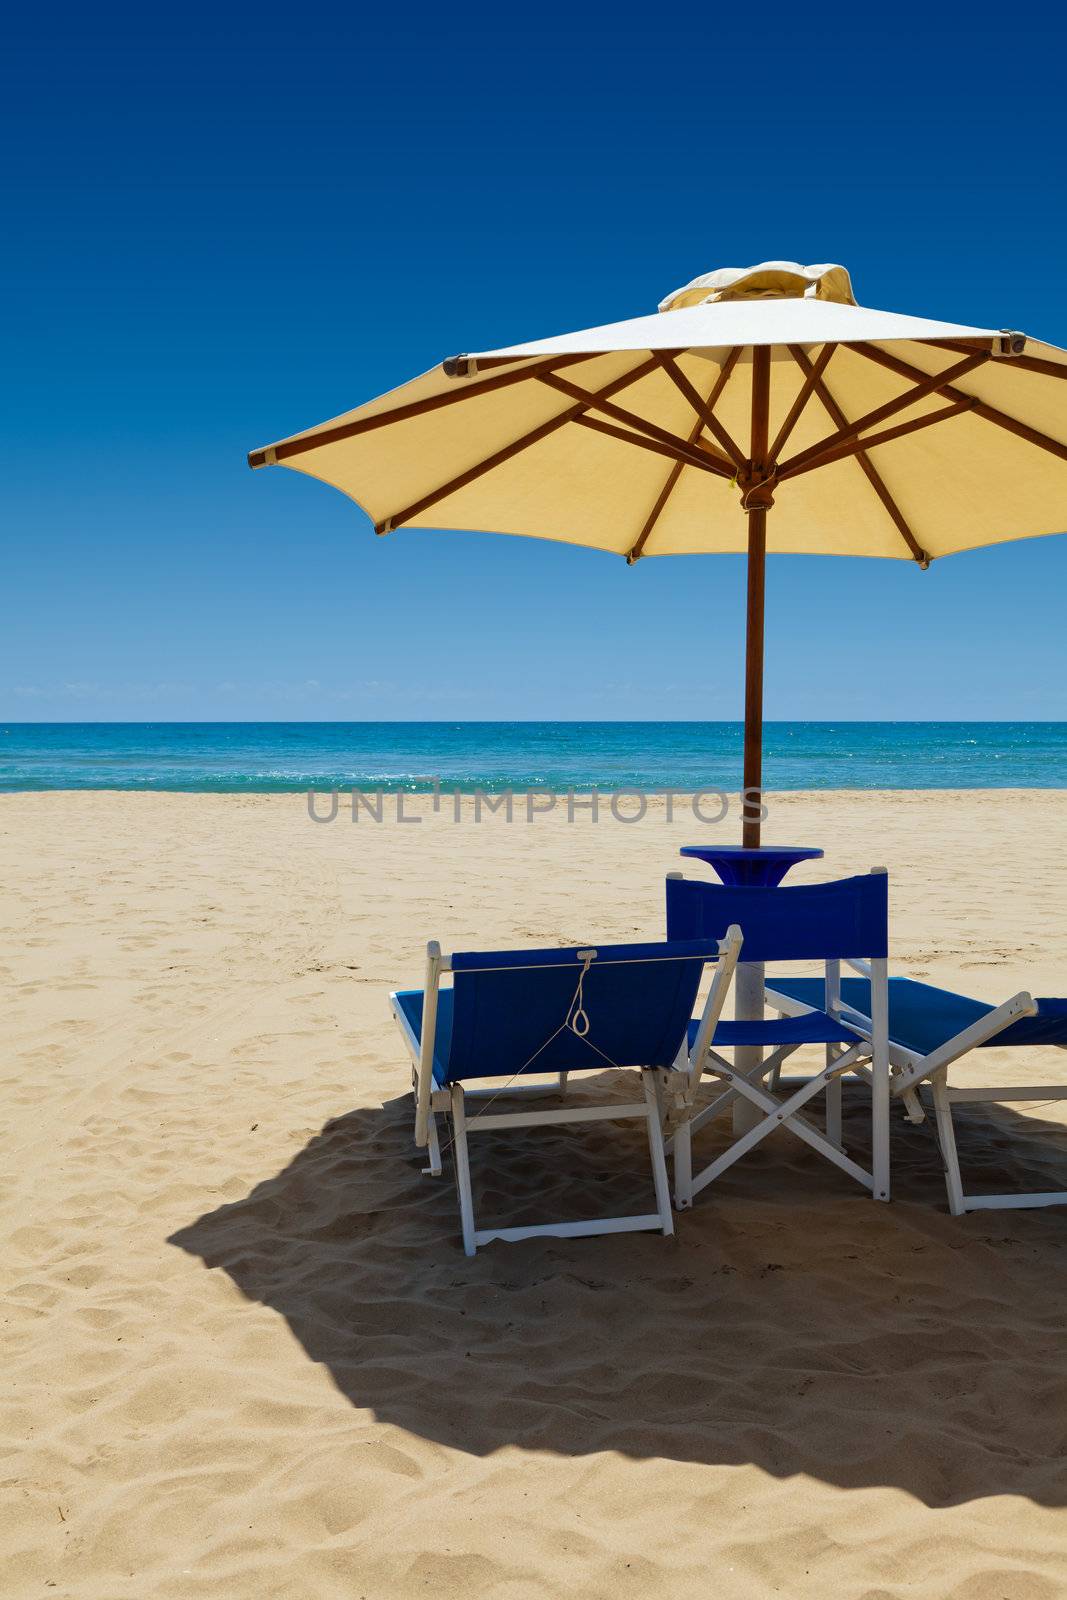 Deck chairs under an umbrella in the sand against the blue sea